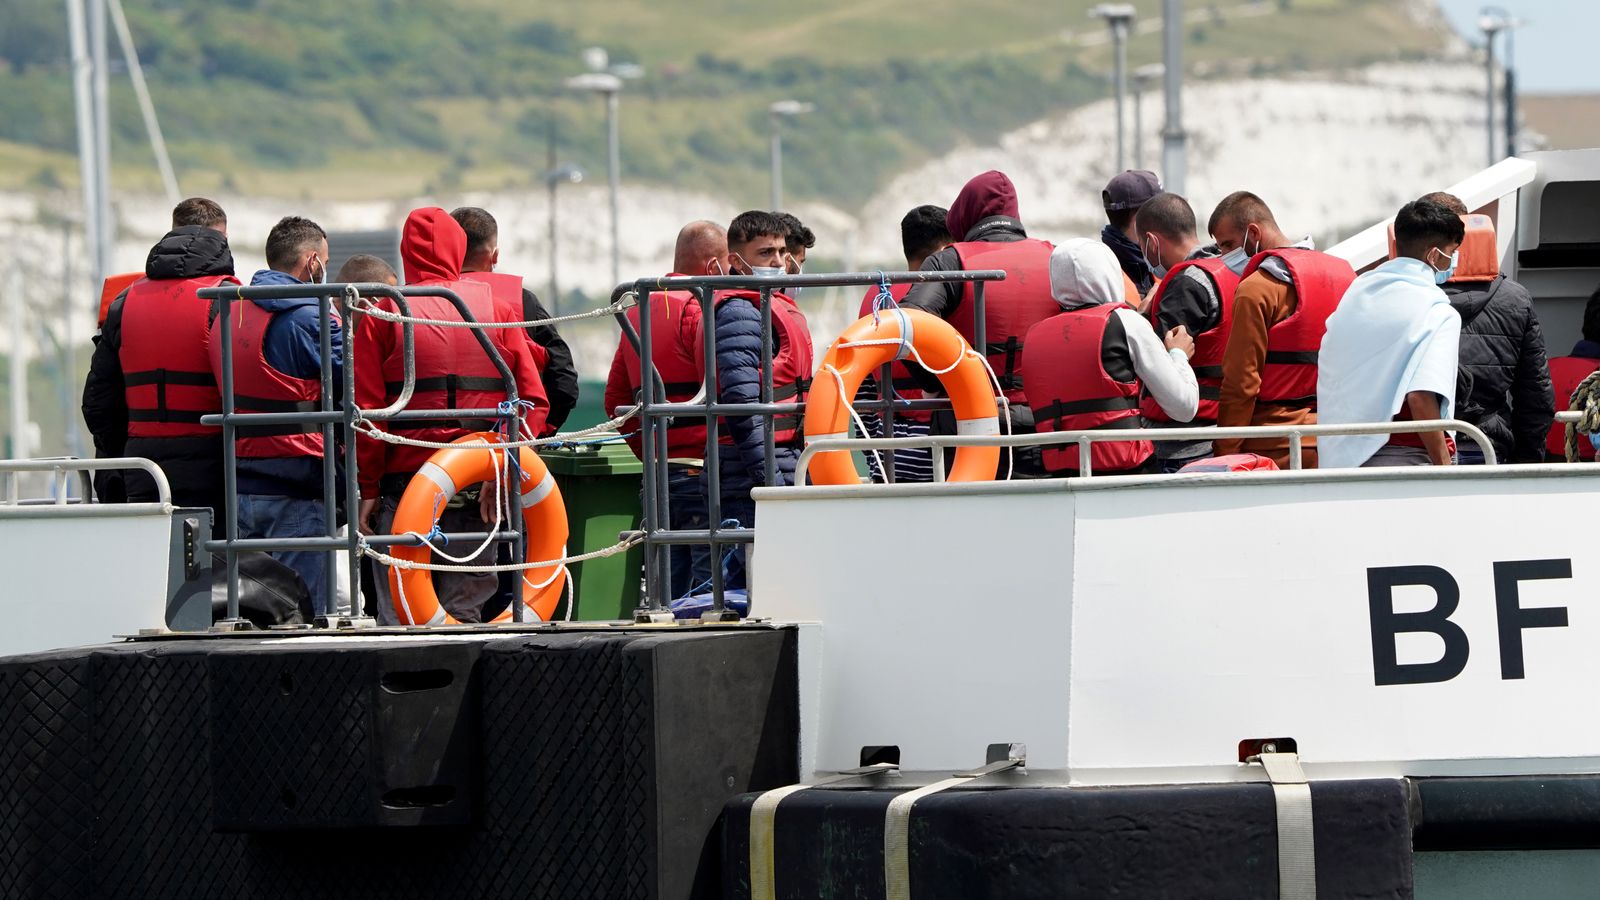 Albanians 'should be barred' from claiming UK asylum, immigration minister says